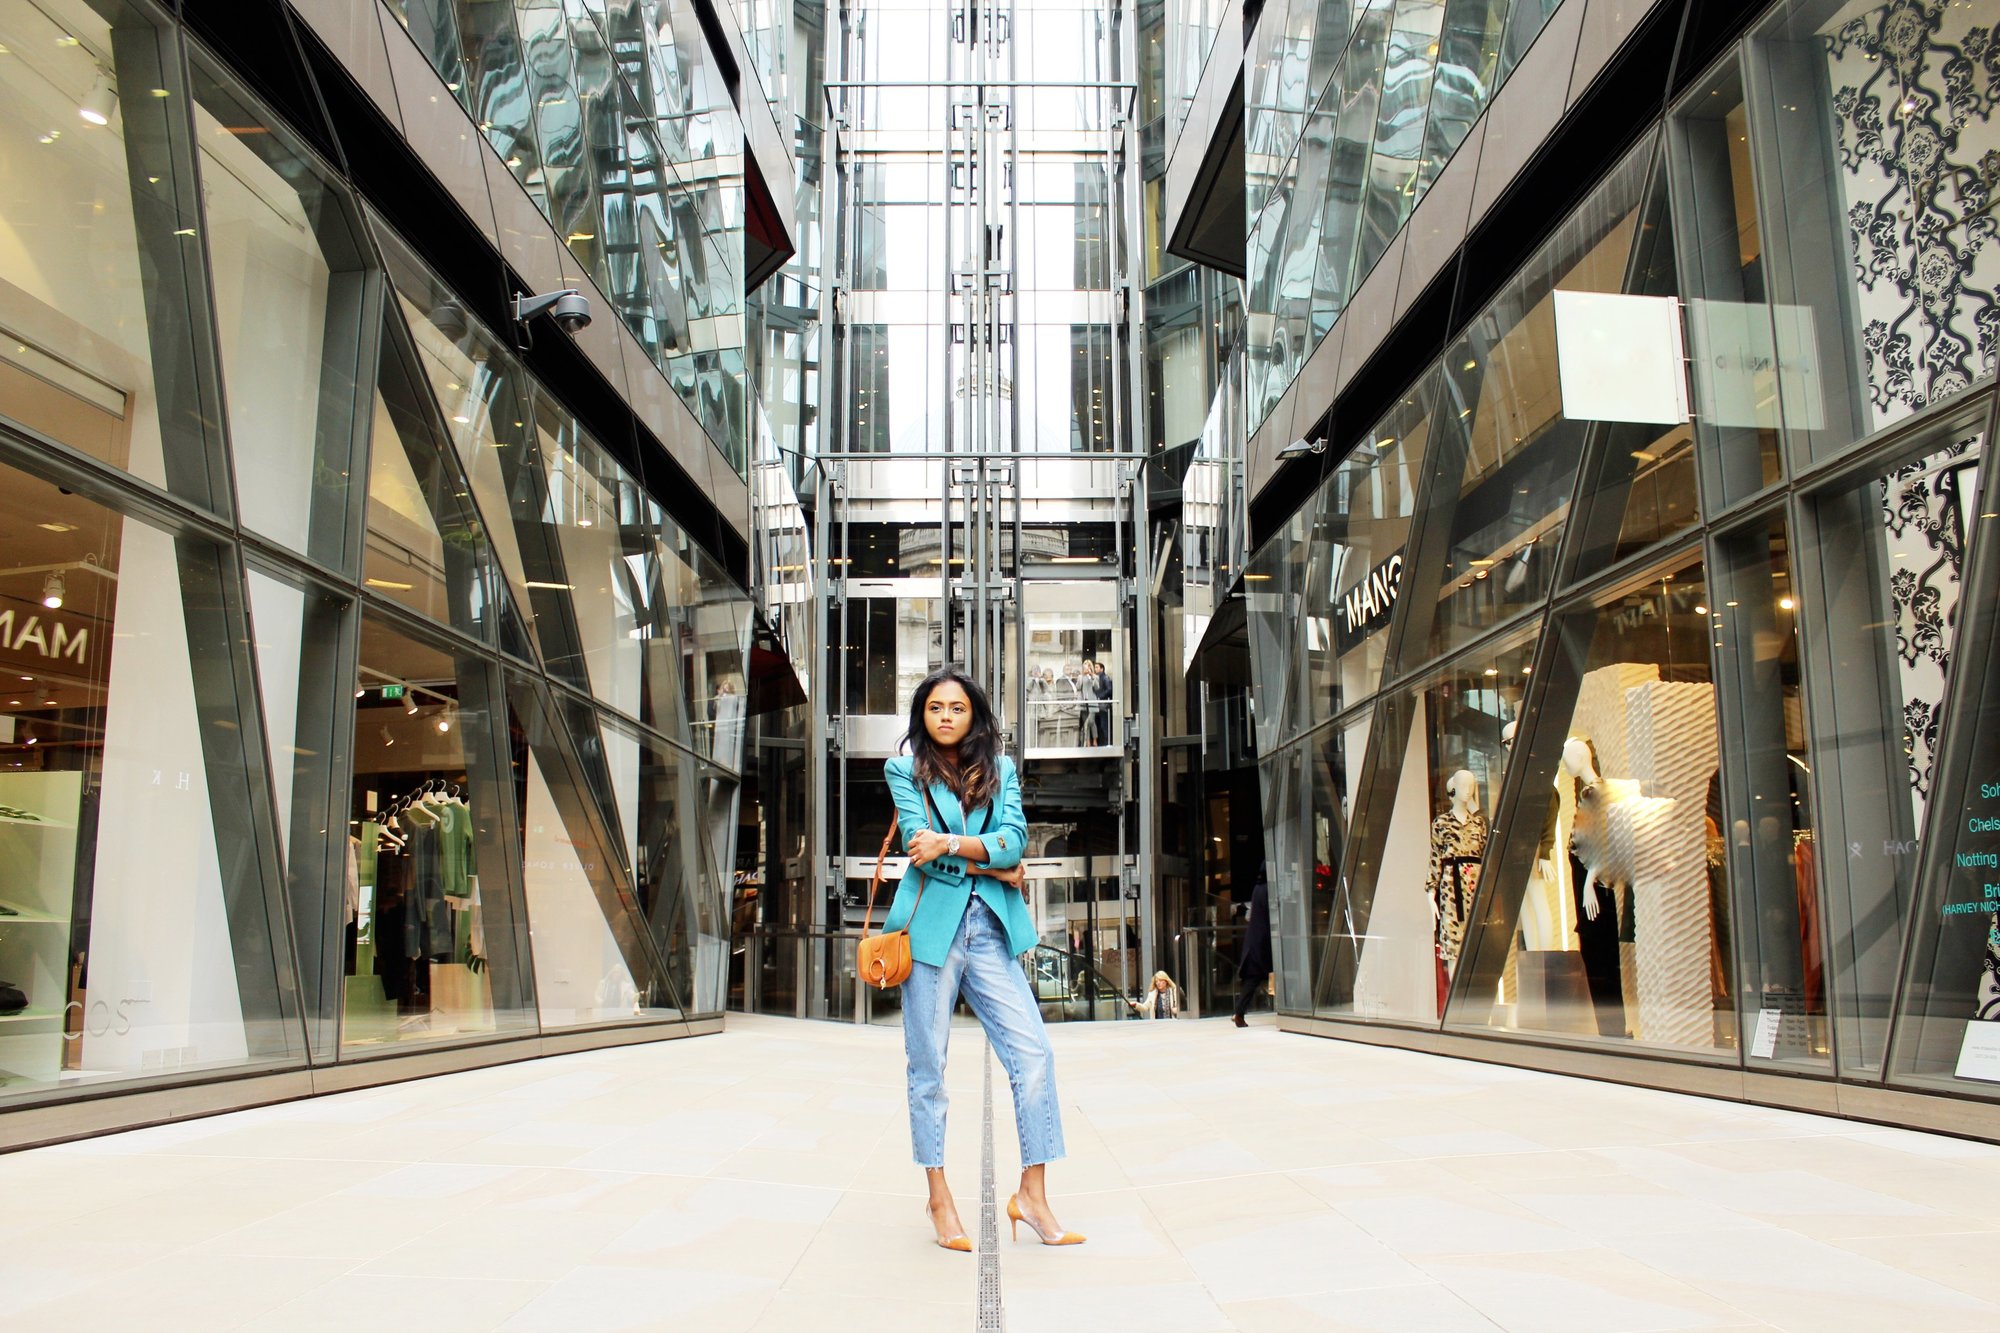 Sachini standing in a shopping street wearing a light blue Fendi vintage blazer, blue jeans and brown Gianvito Rossi heels with a brown handbag